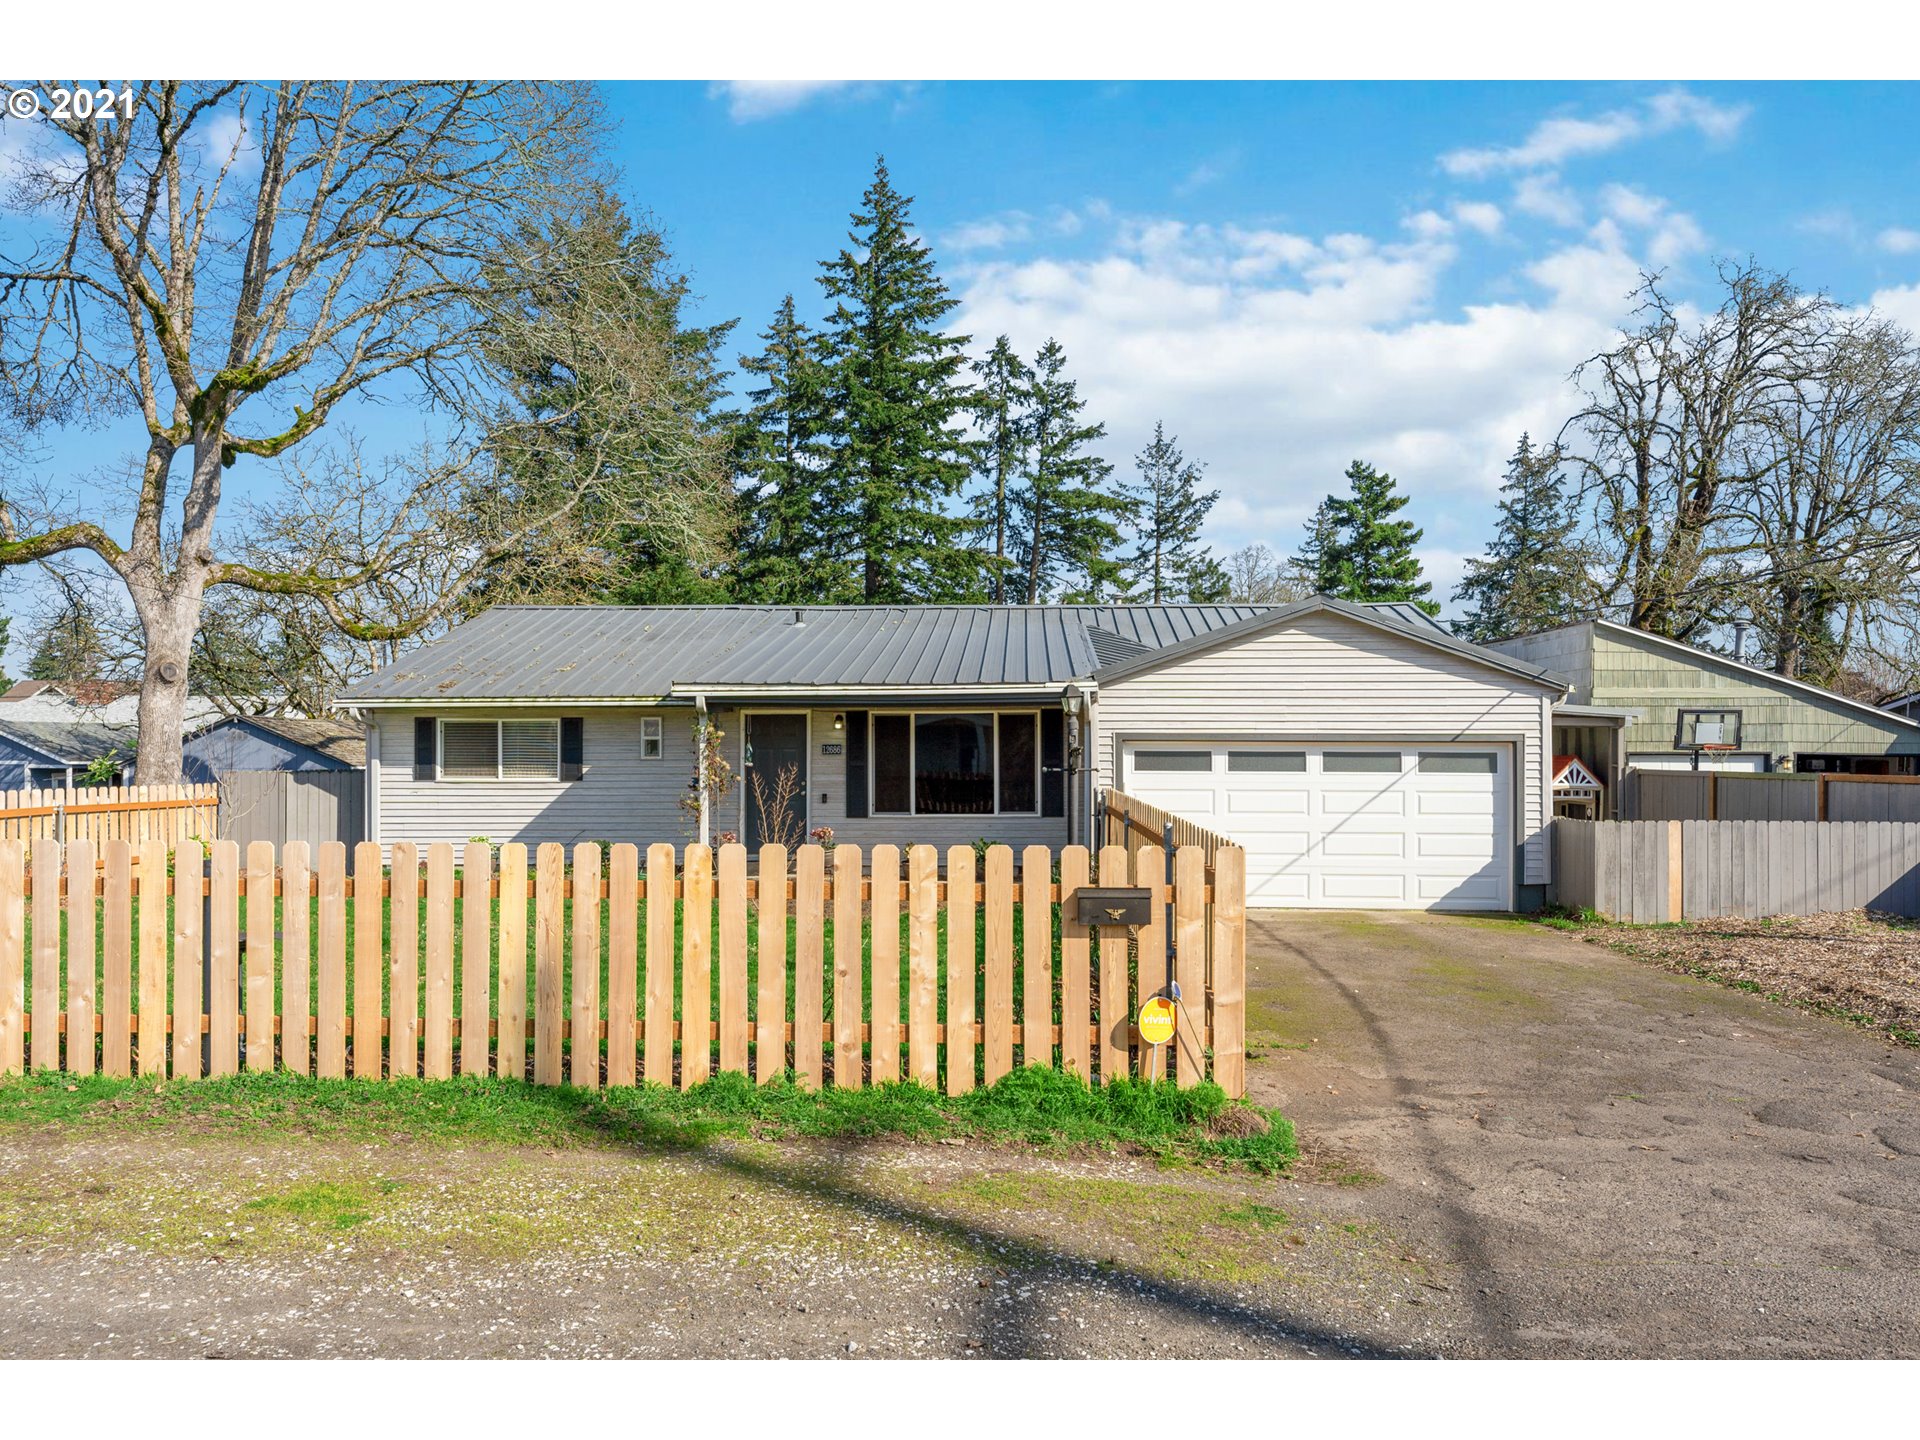 12686 SE 23RD AVE (1 of 21)